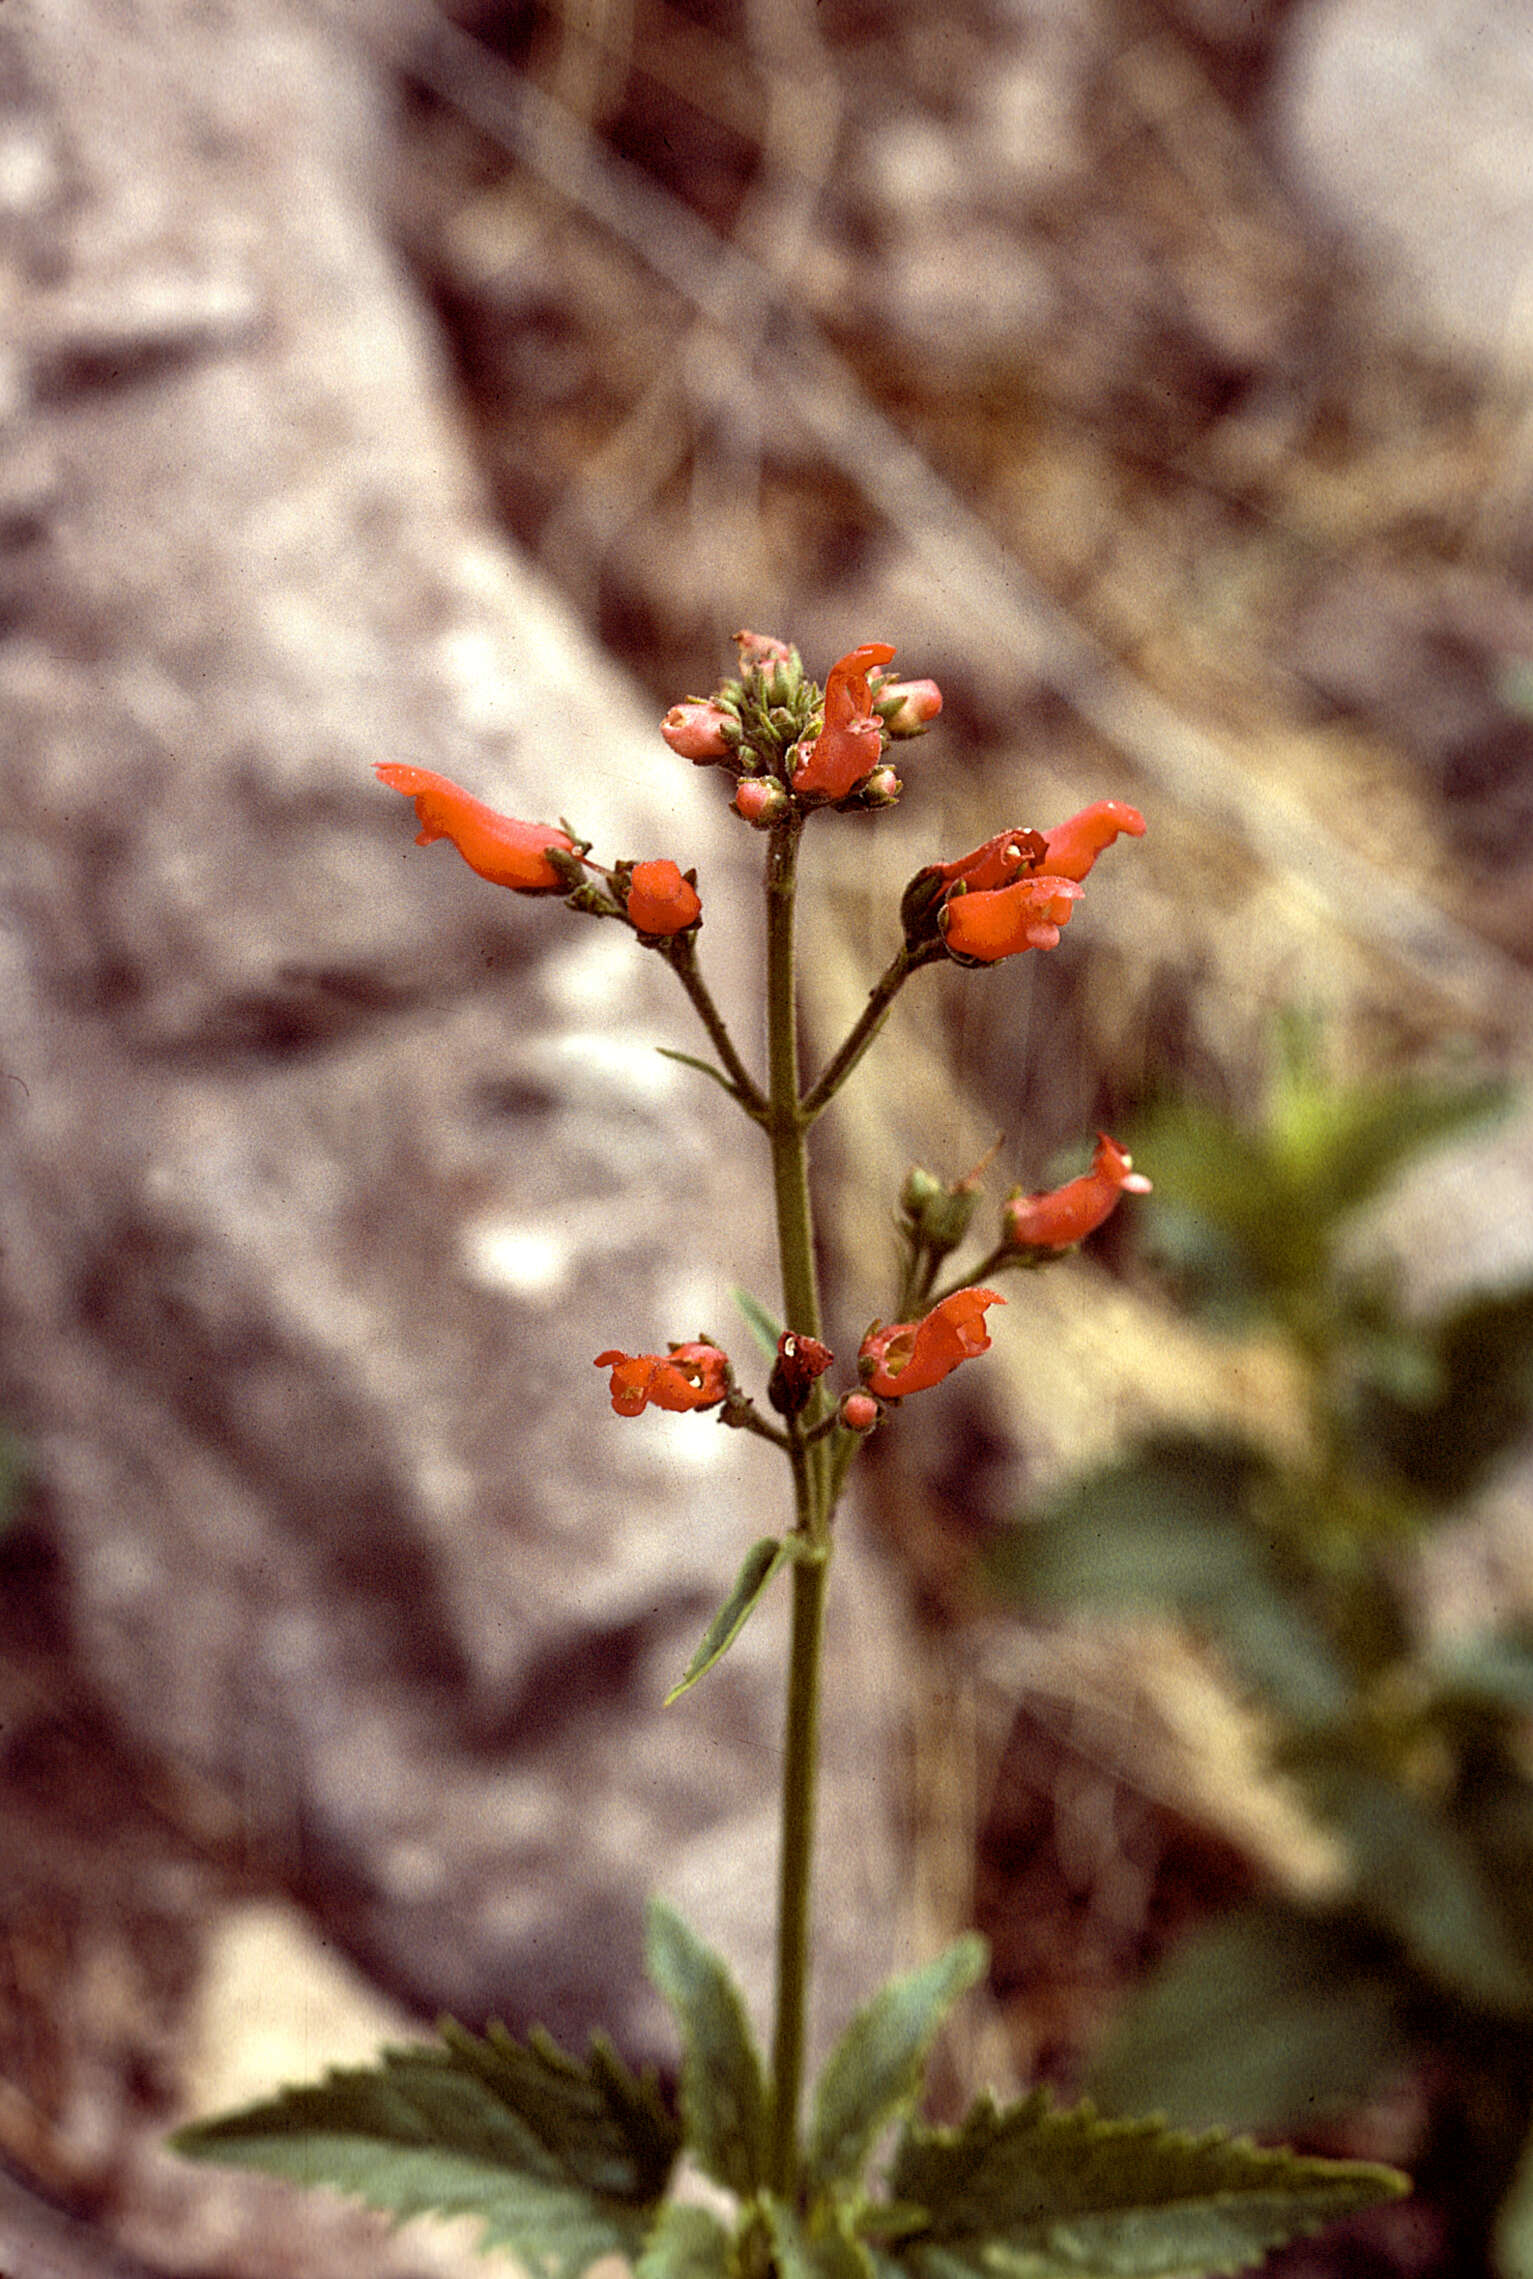 Image of New Mexico figwort